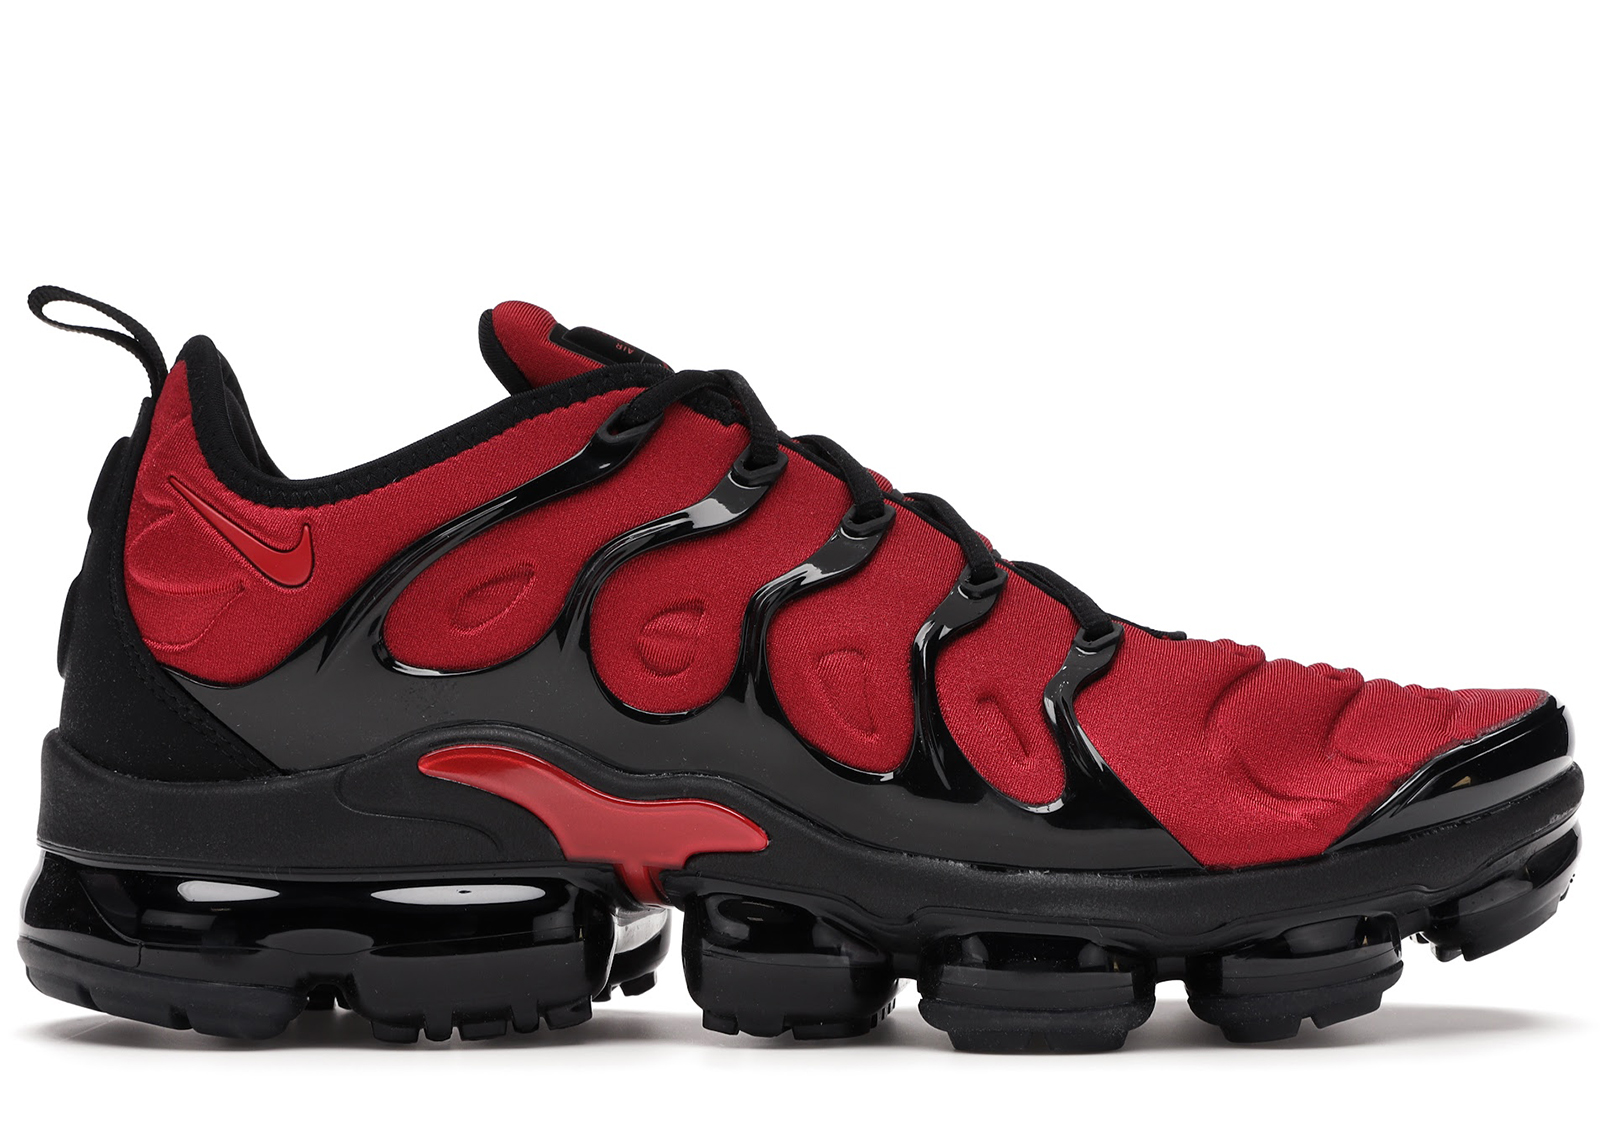 vapor max black and red